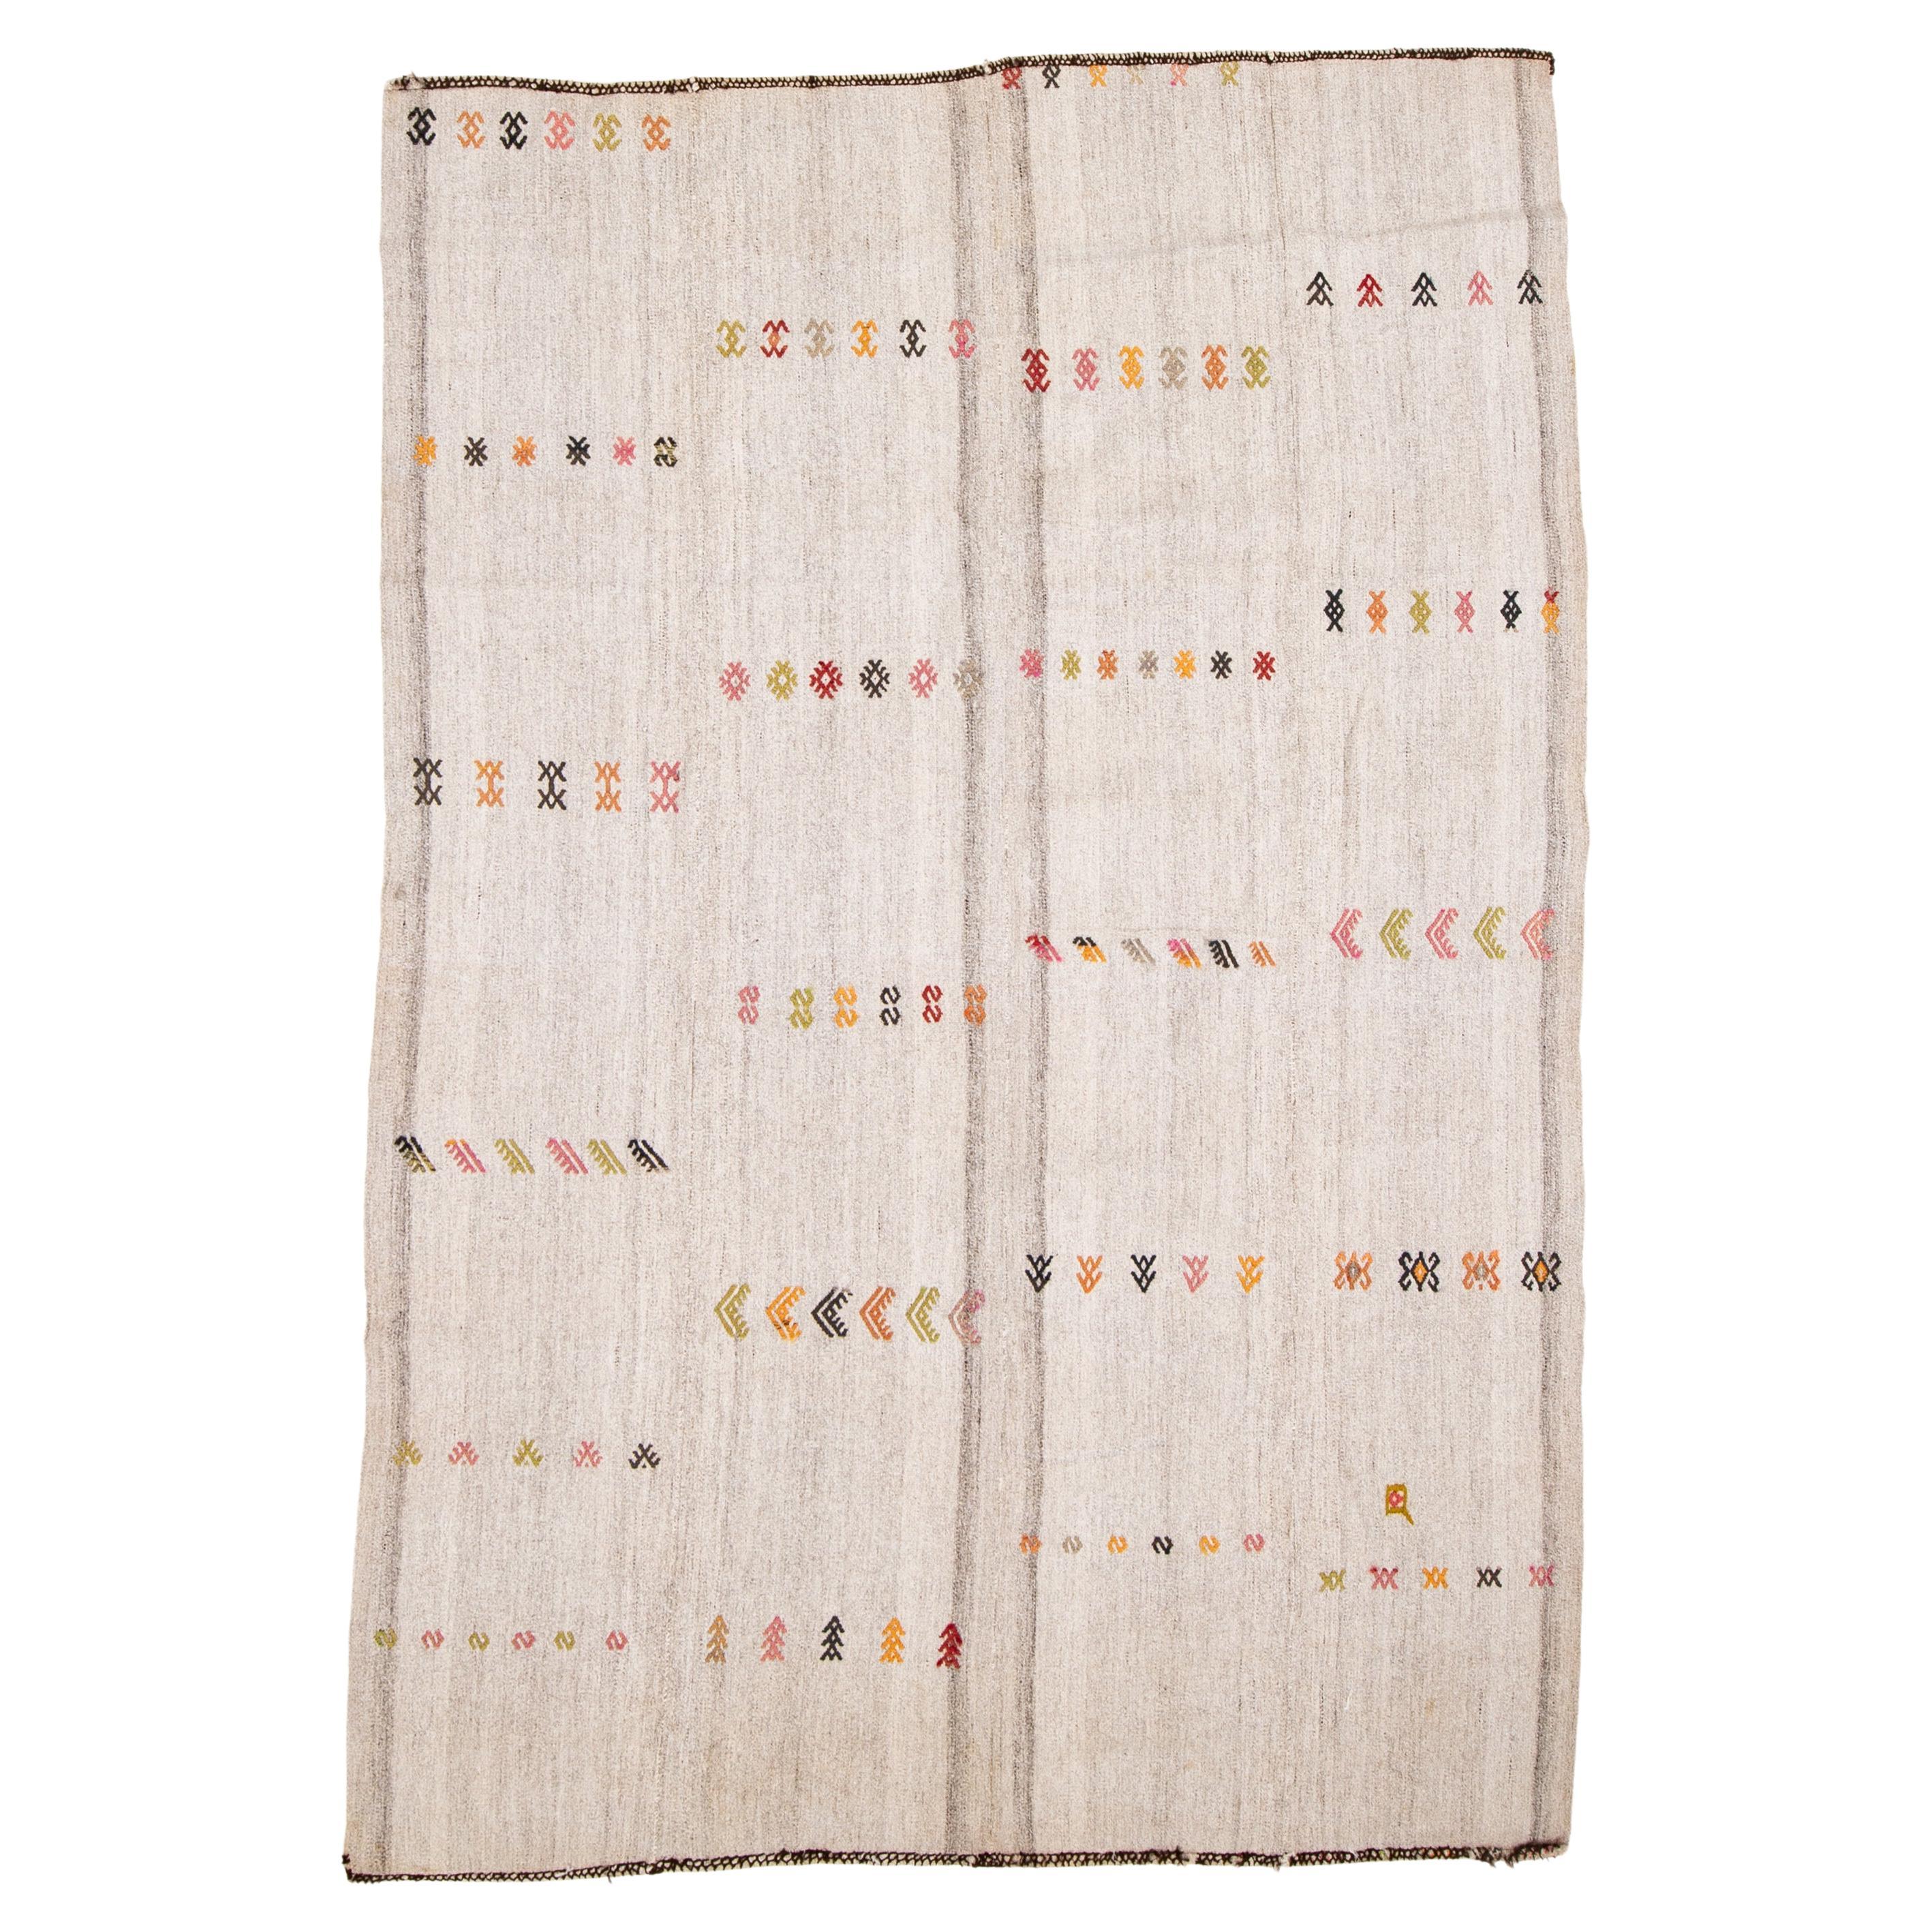 Anatolian Kilim, Cotton and Goat Hair Mix, 1960s For Sale